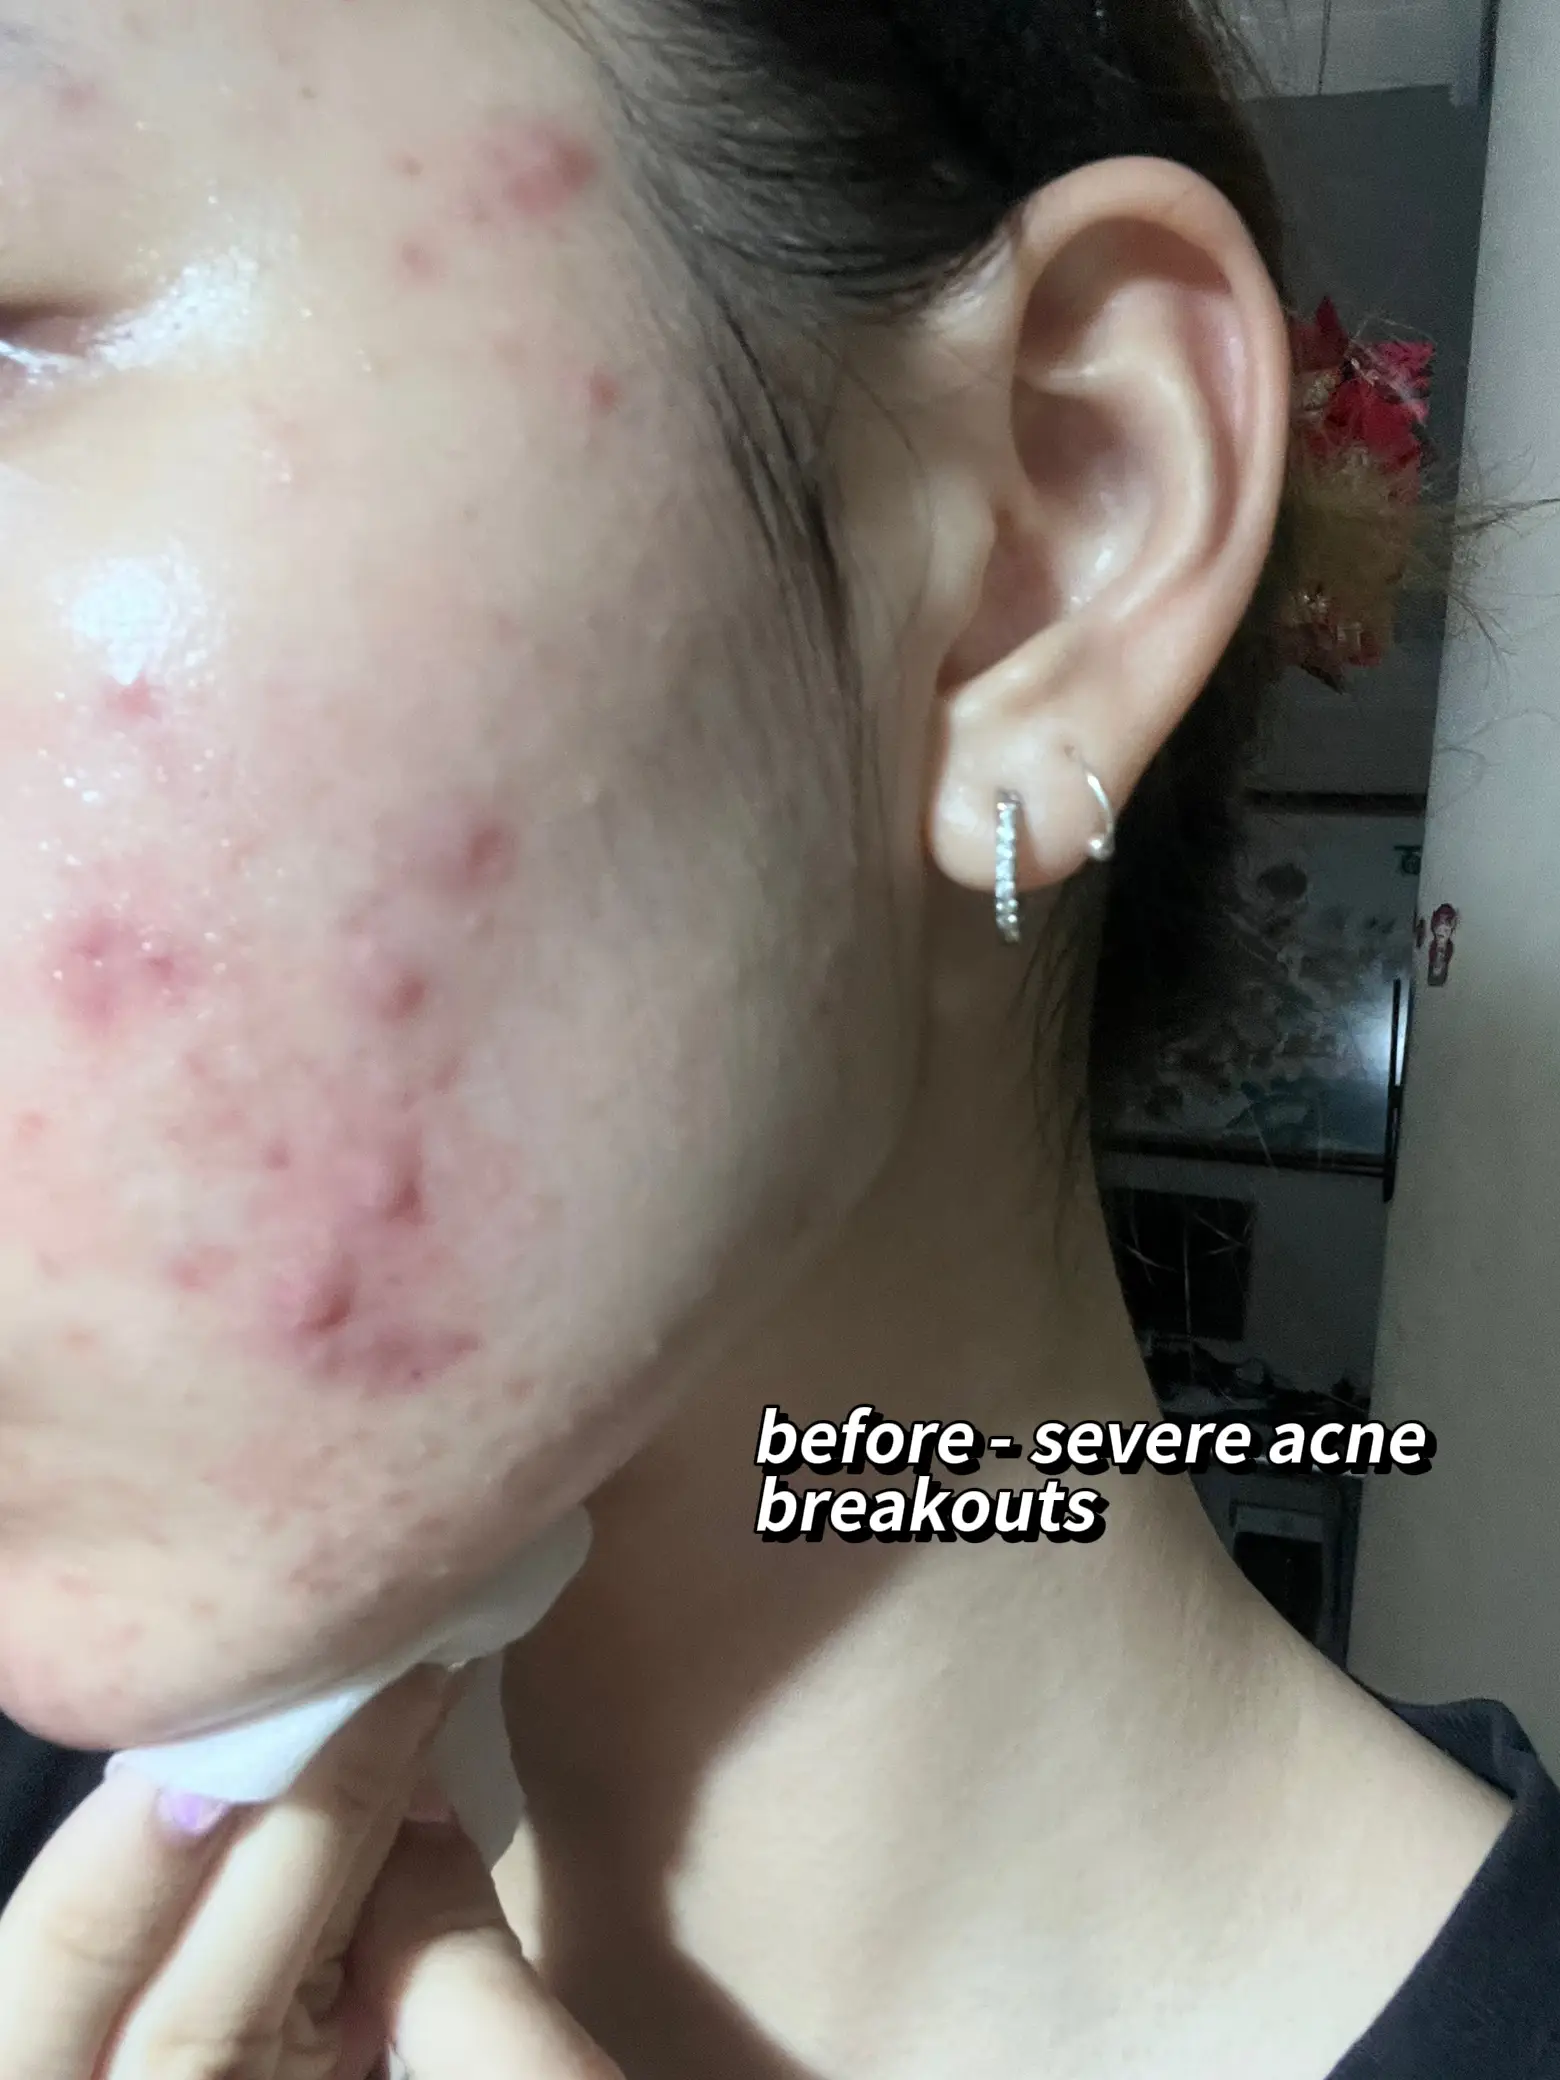 ACCUTANE DOOP THAT FINALLY CLEARED MY SEVERE ACNE🥹's images(2)